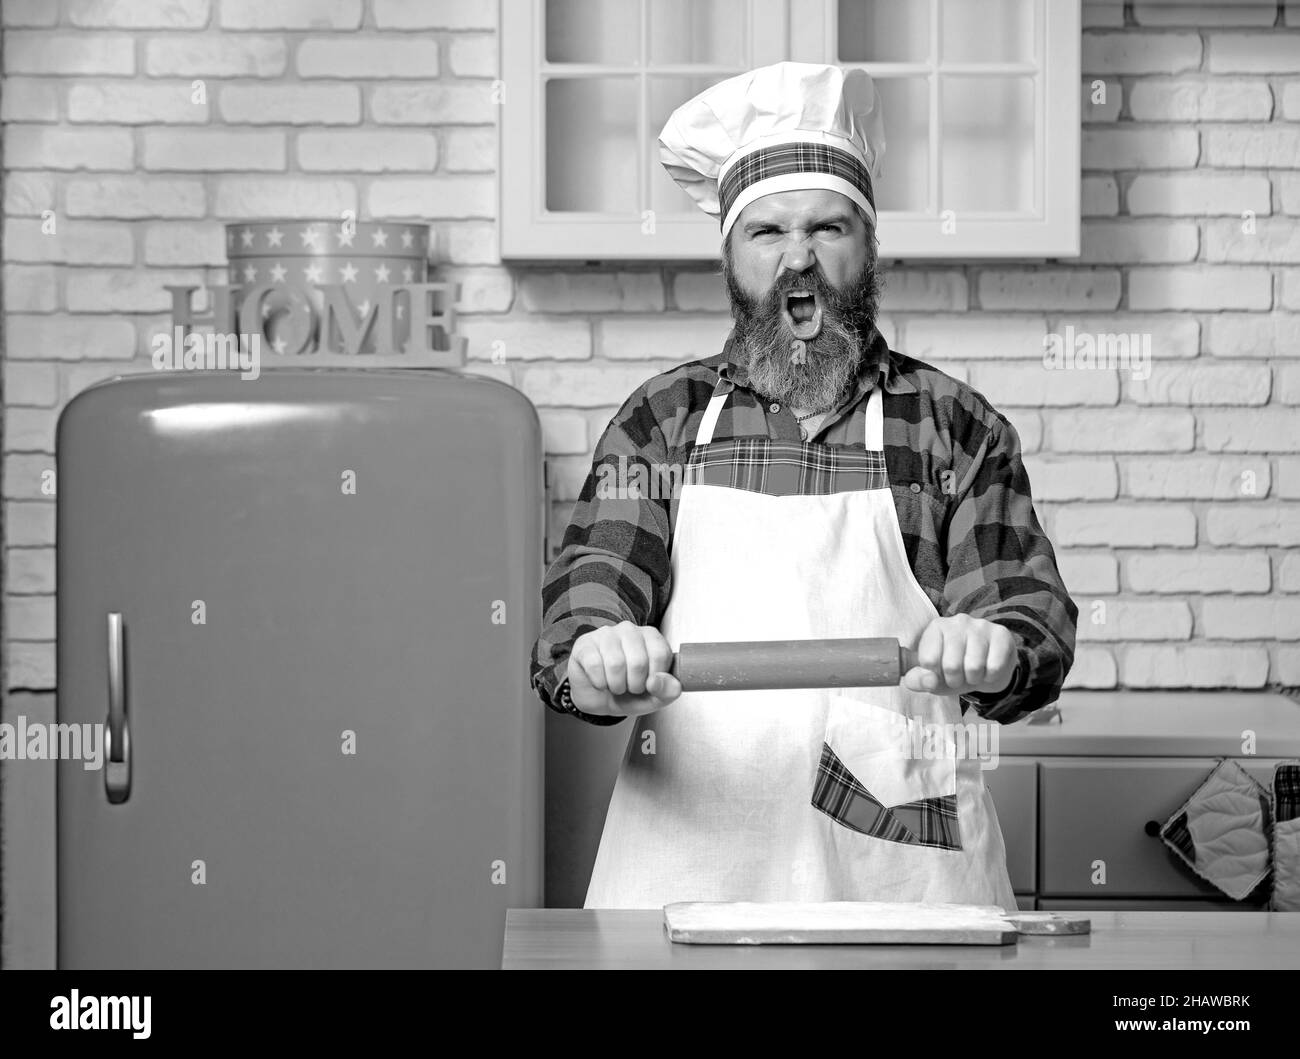 Epices Rabelais Marseille Chef Holding Knife Editorial Stock Photo